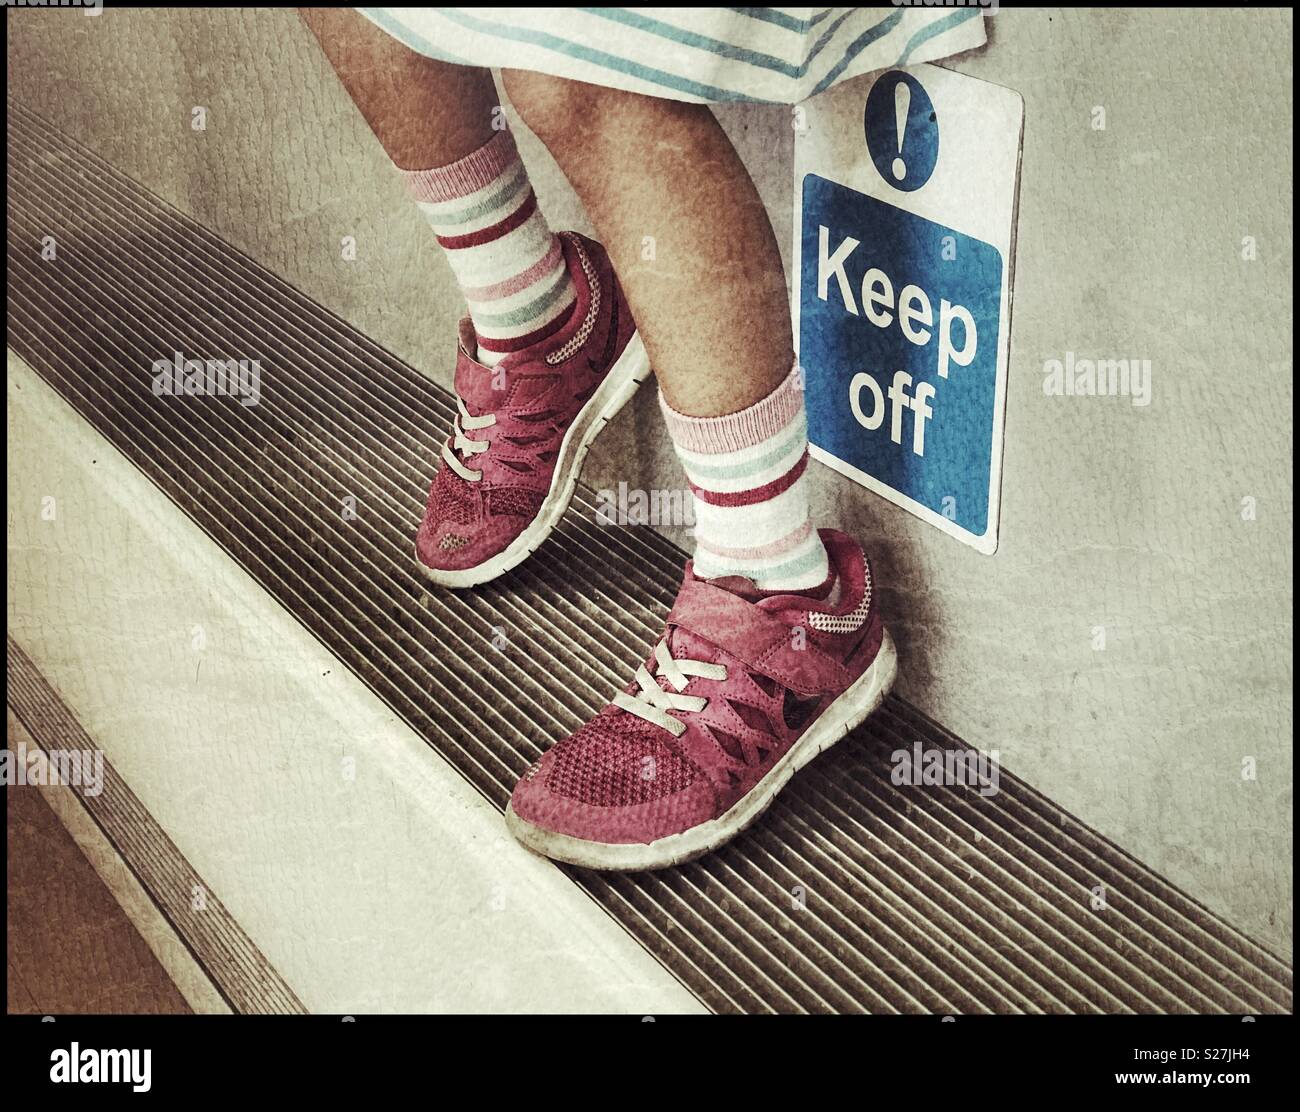 A girl rests her feet on a ledge that is also a radiator. The sign says “Keep Off!” She’s ignoring the request. Children never listen?! Photo Credit - © COLIN HOSKINS. Stock Photo